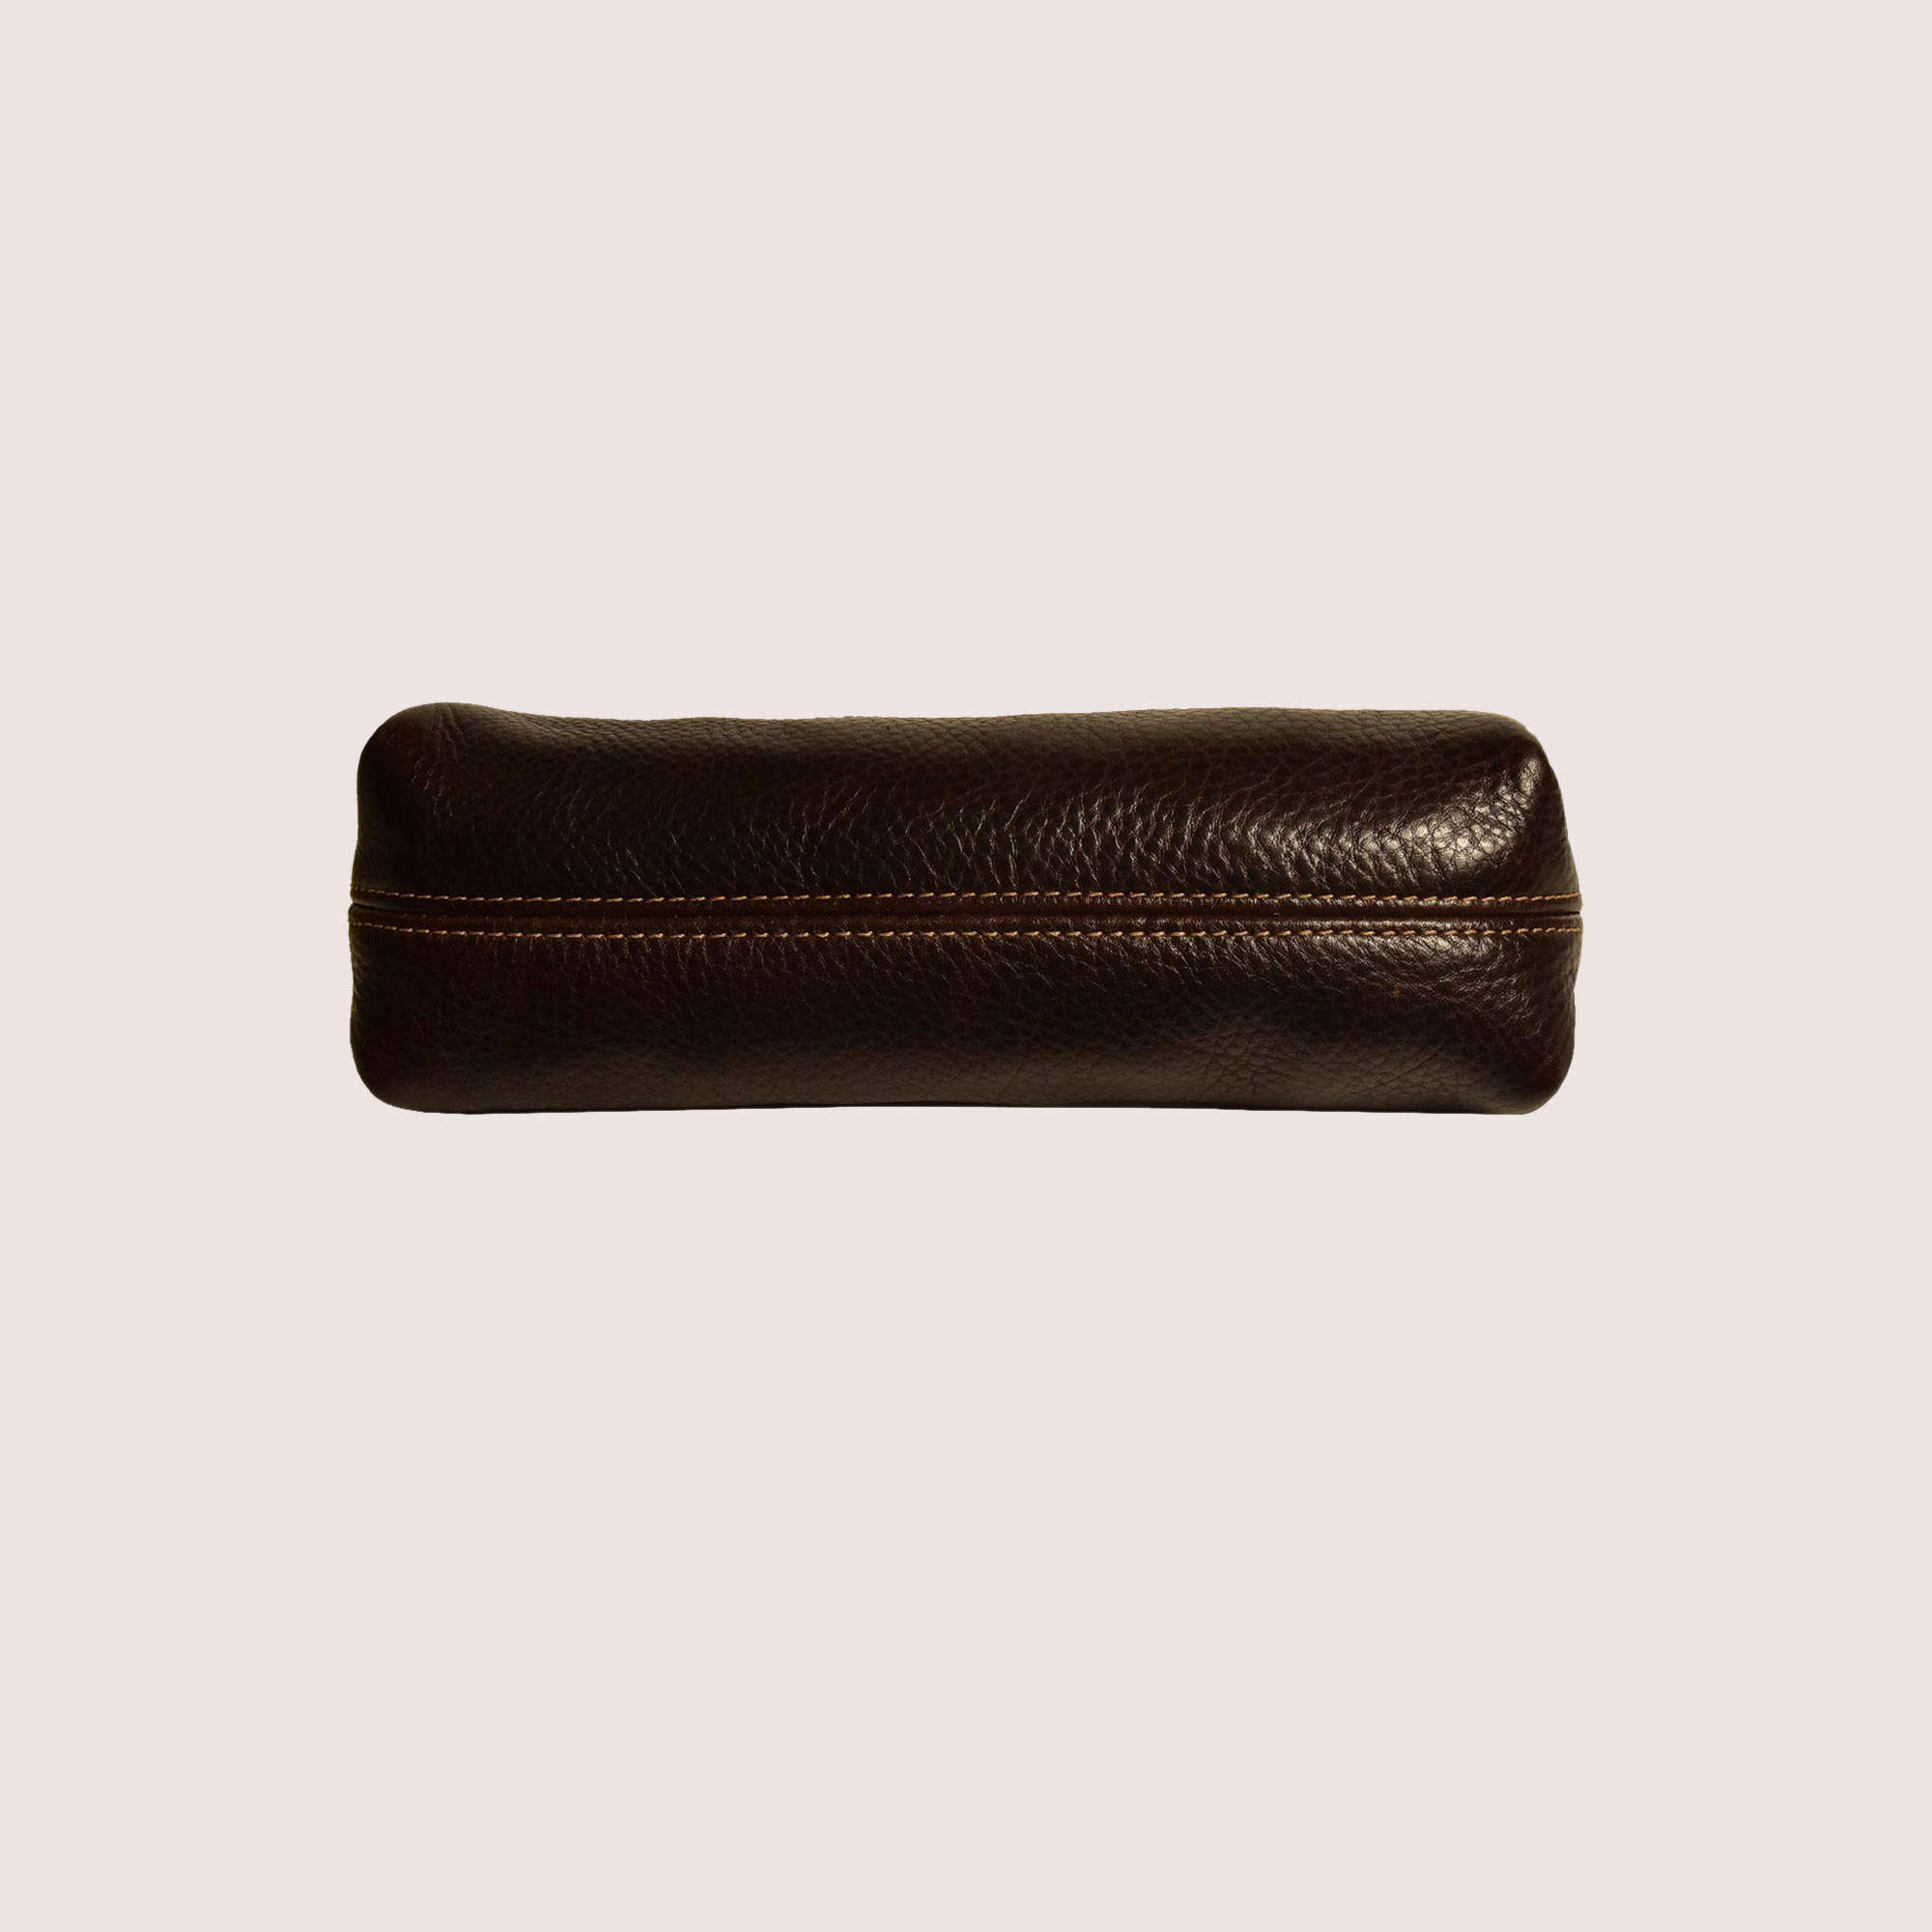 Aston Leather | Pen or Multi Purpose Leather Pouch